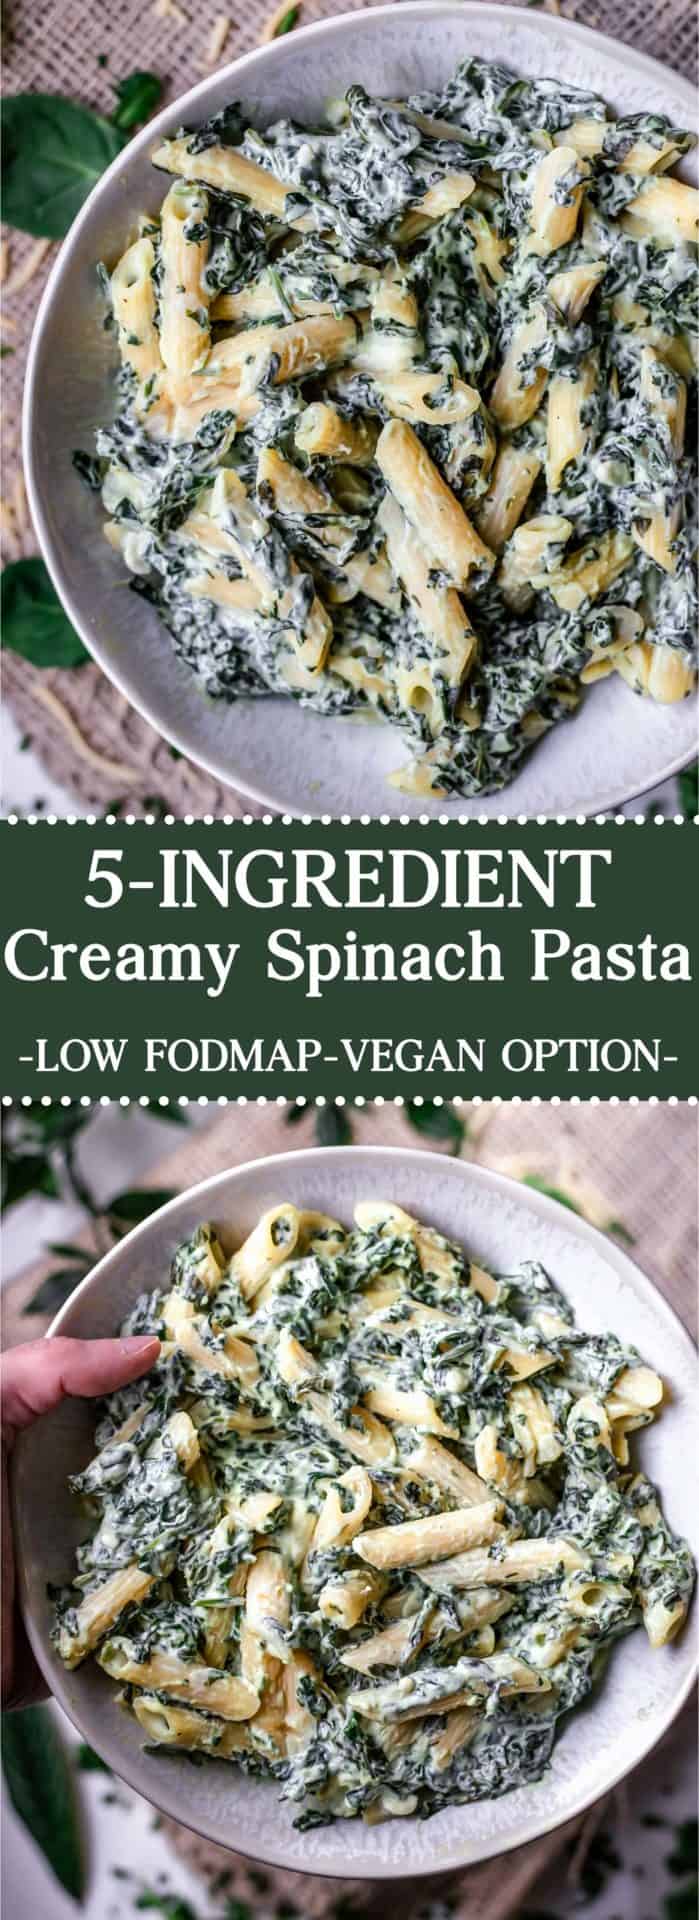 This Creamy Spinach Pasta is rich, satisfying, savory, comforting, very simple to make, tummy-friendly, and just so delicious!